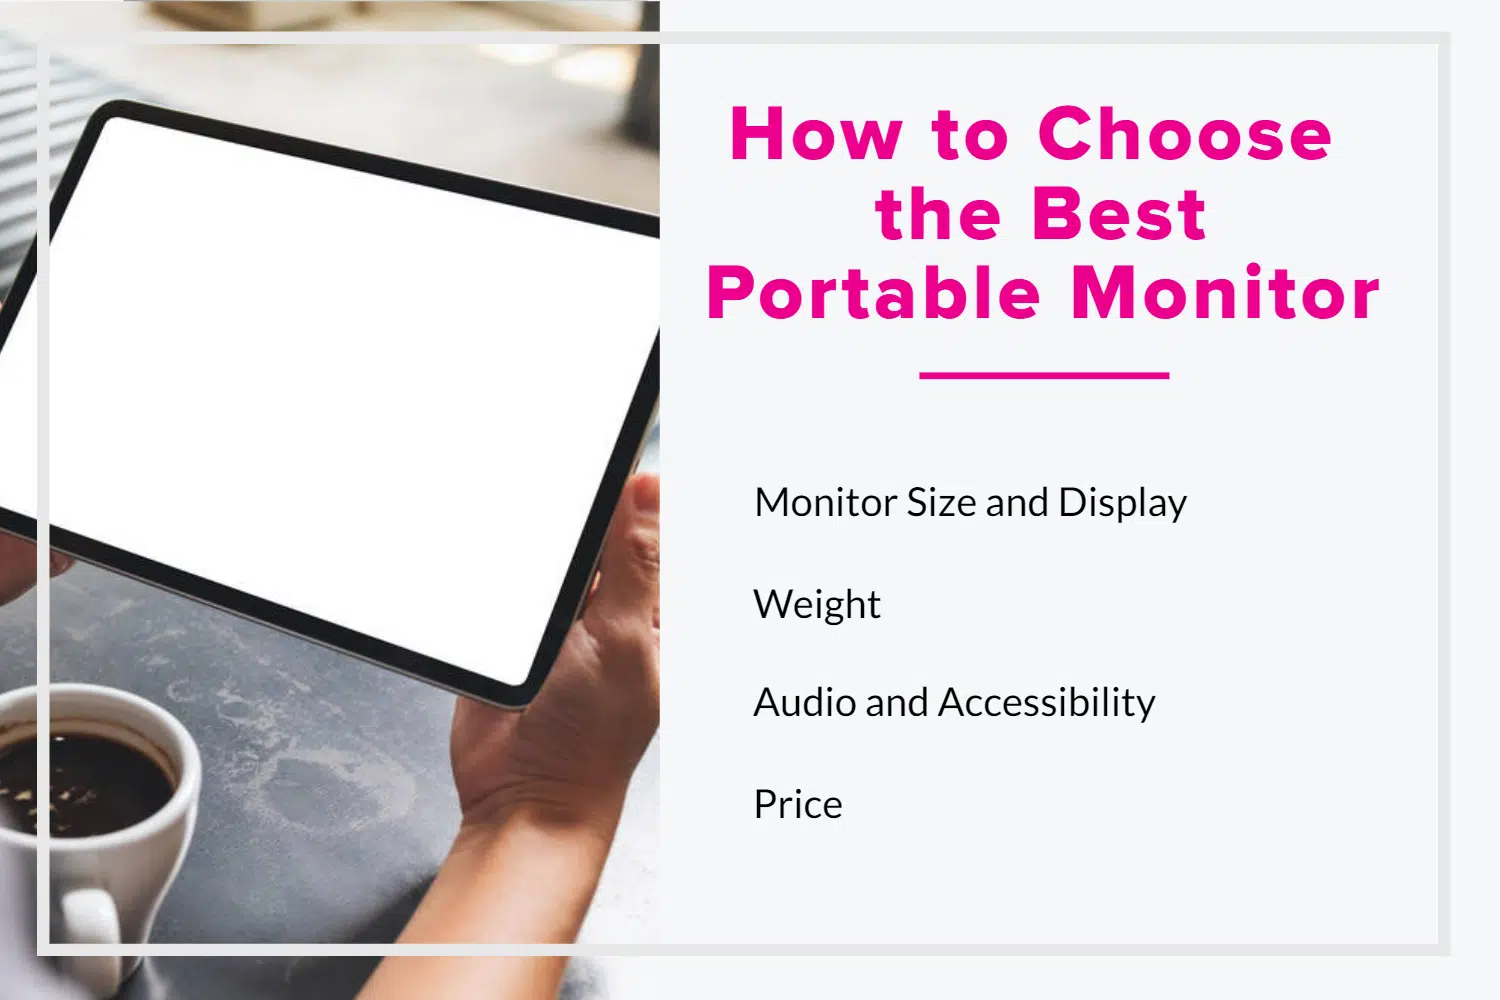 How to Choose the Best Portable Monitor